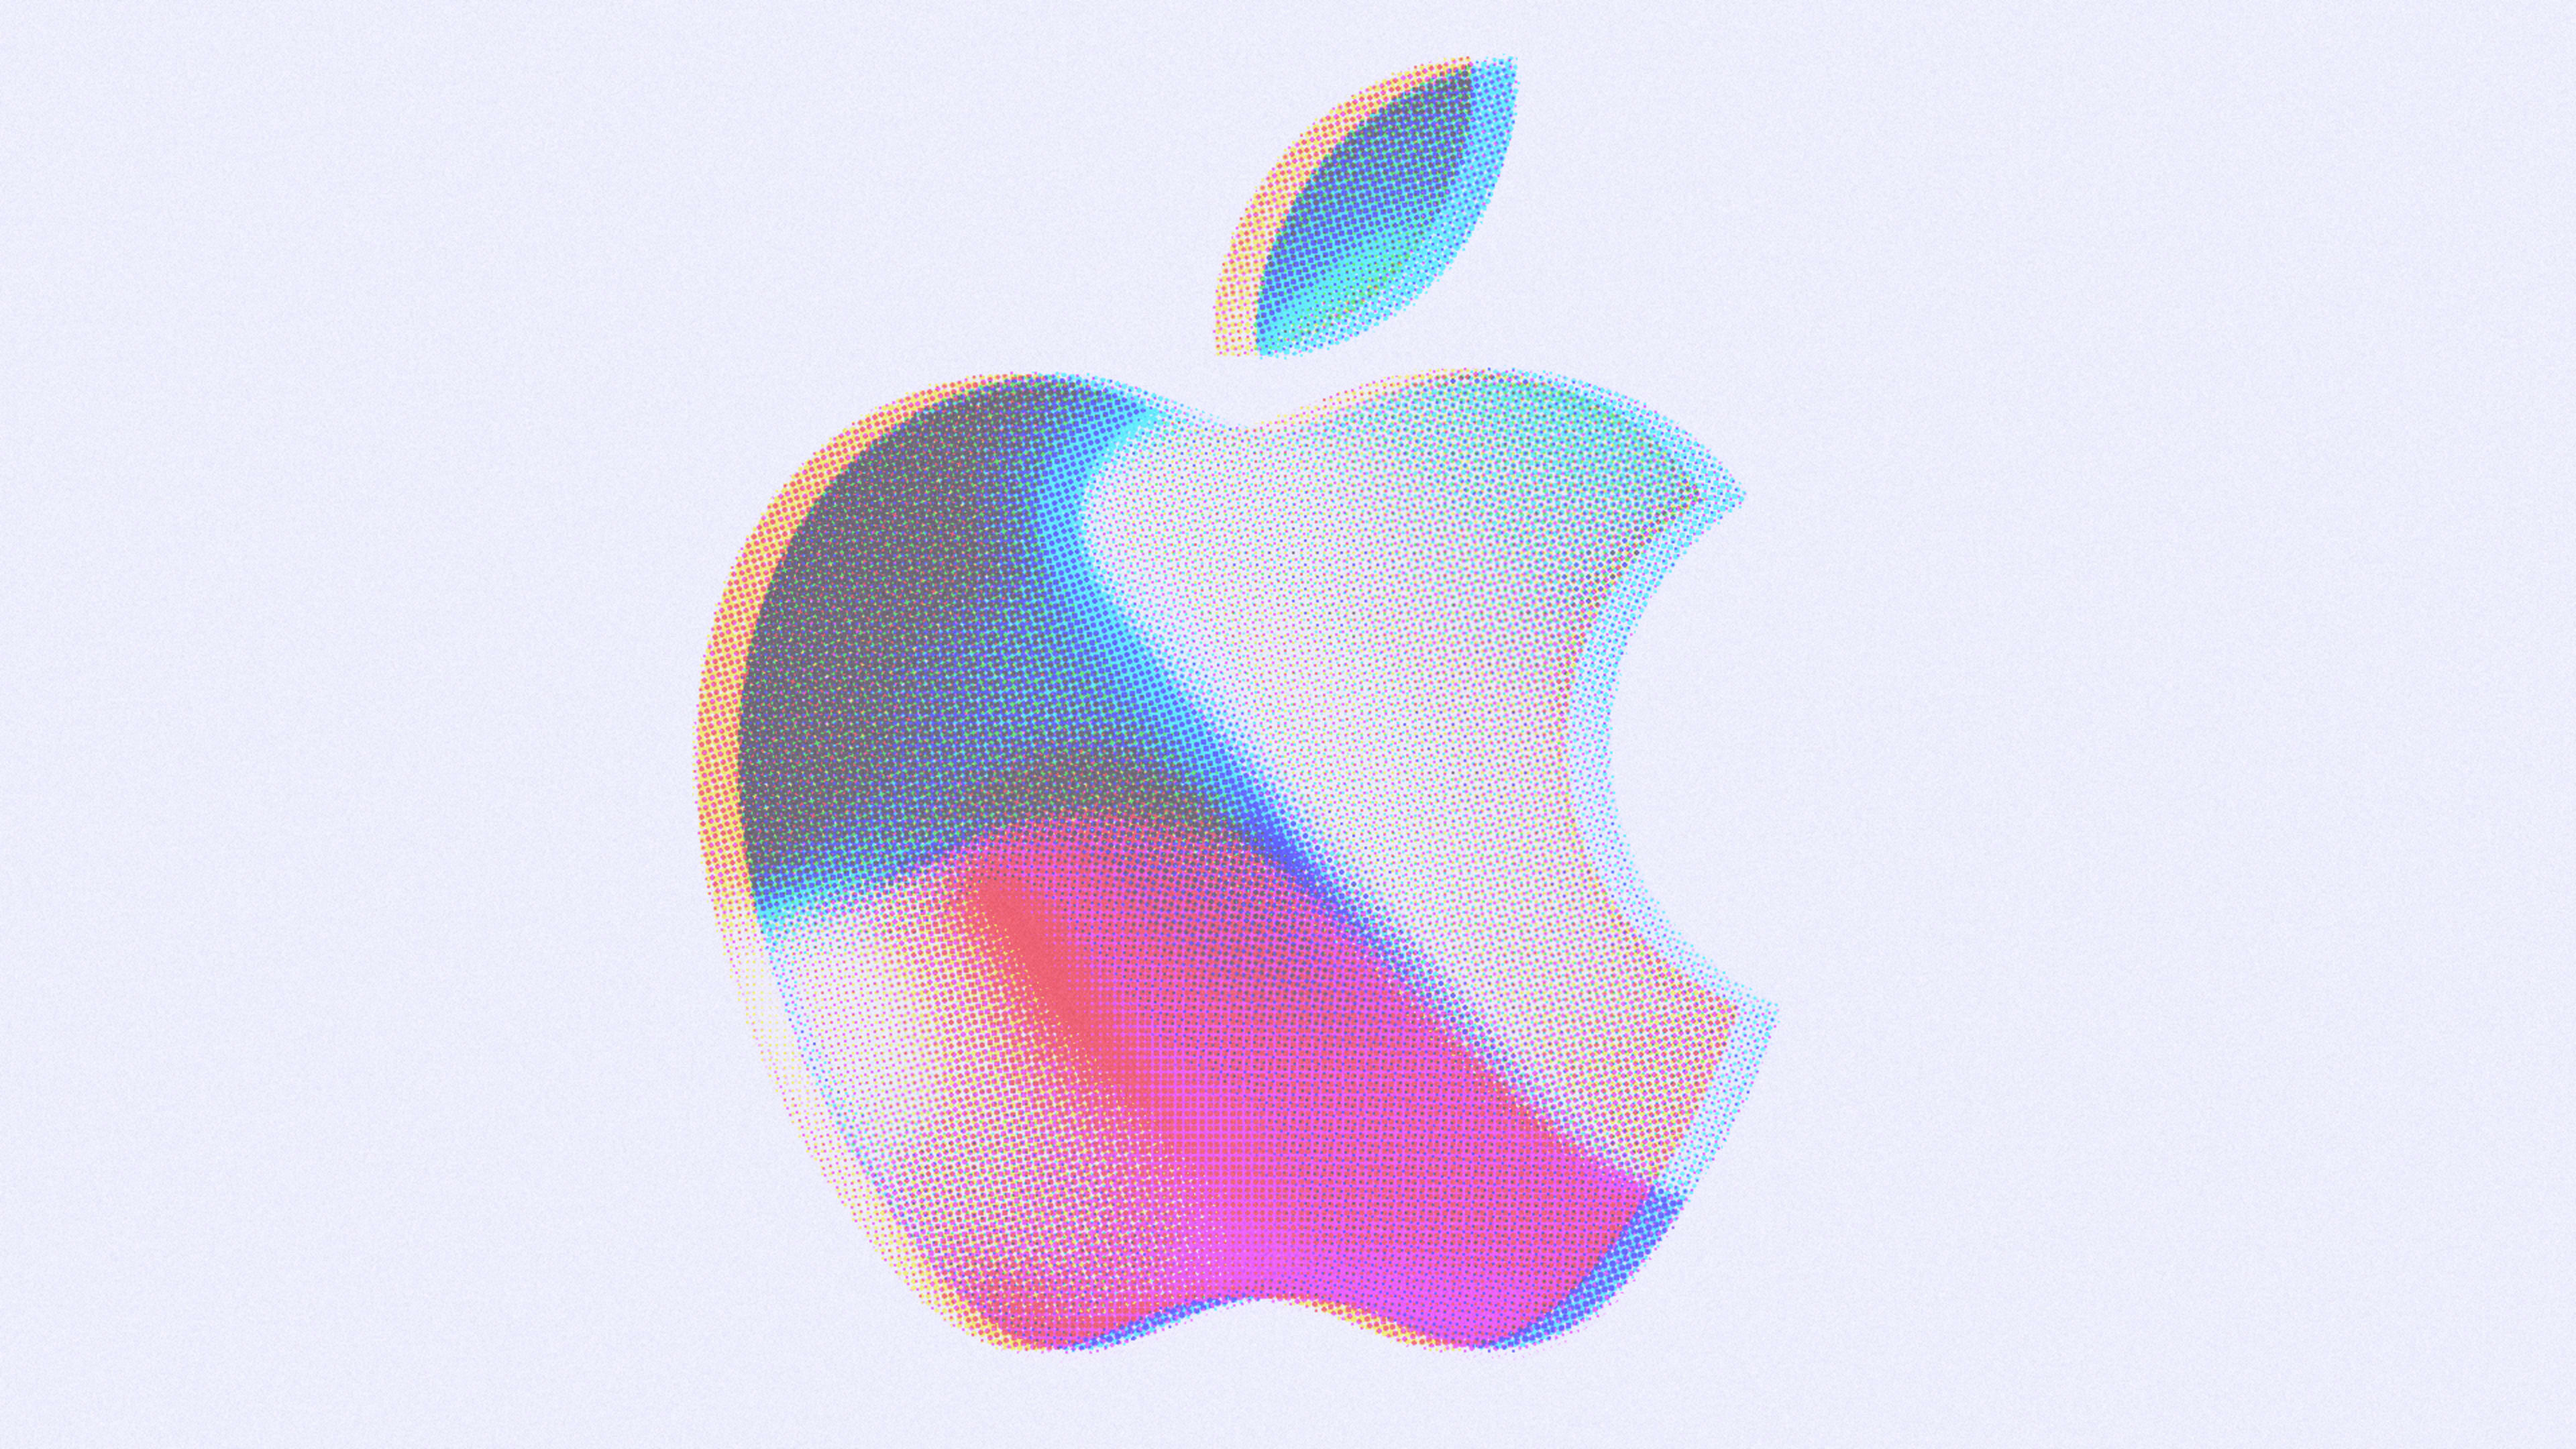 Live coverage of Apple’s September 12 iPhone event